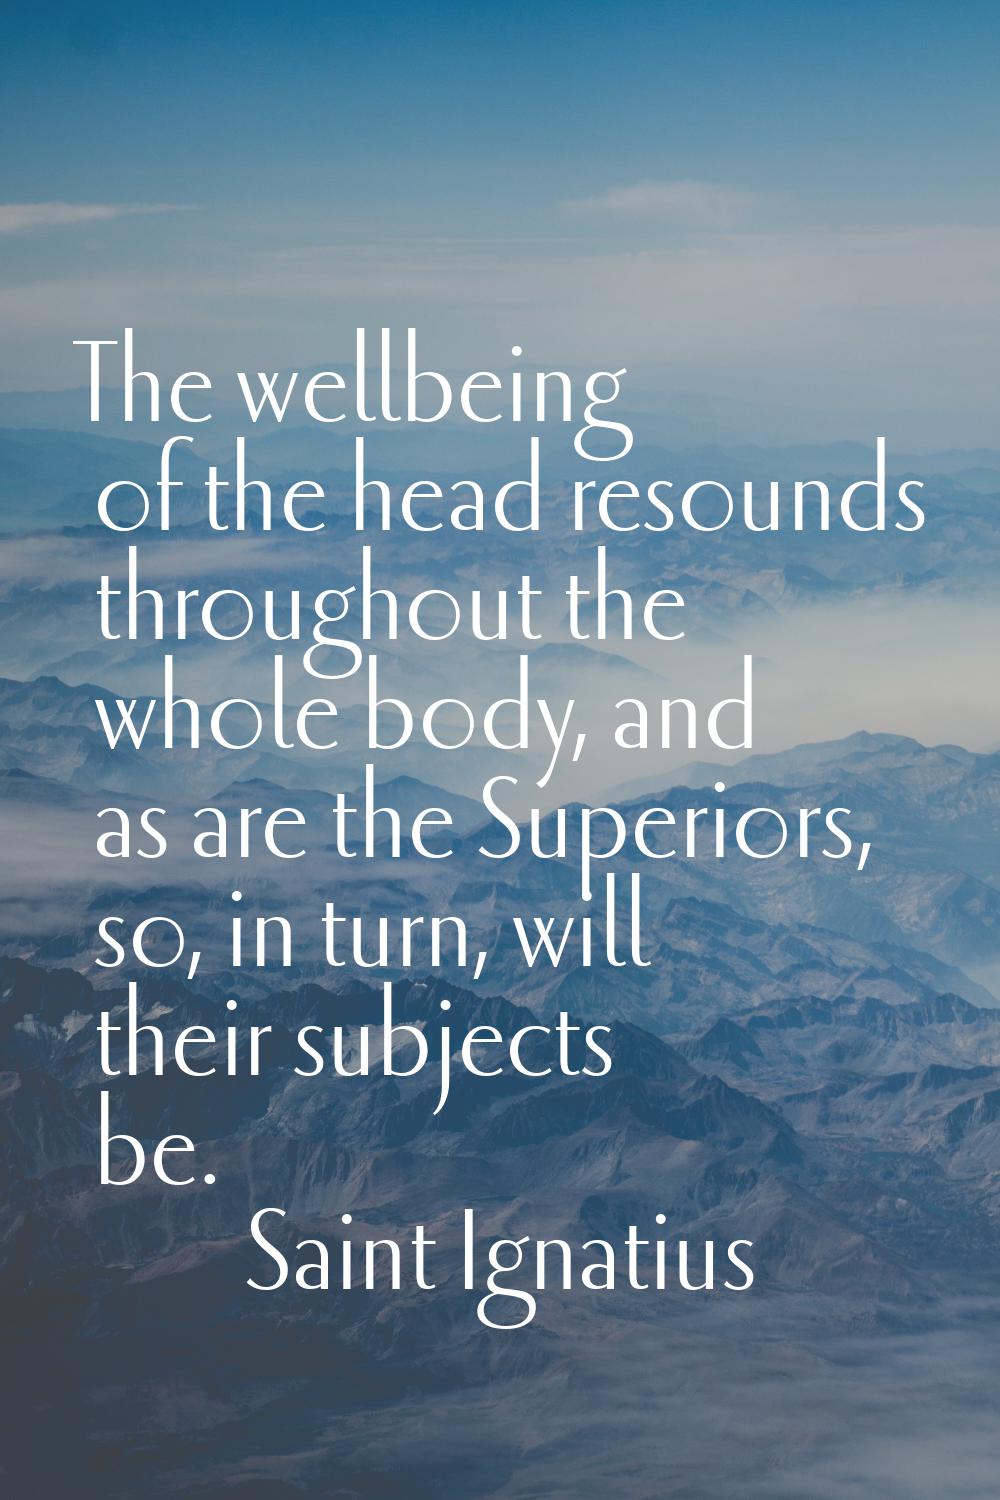 The wellbeing of the head resounds throughout the whole body, and as are the Superiors, so, in turn